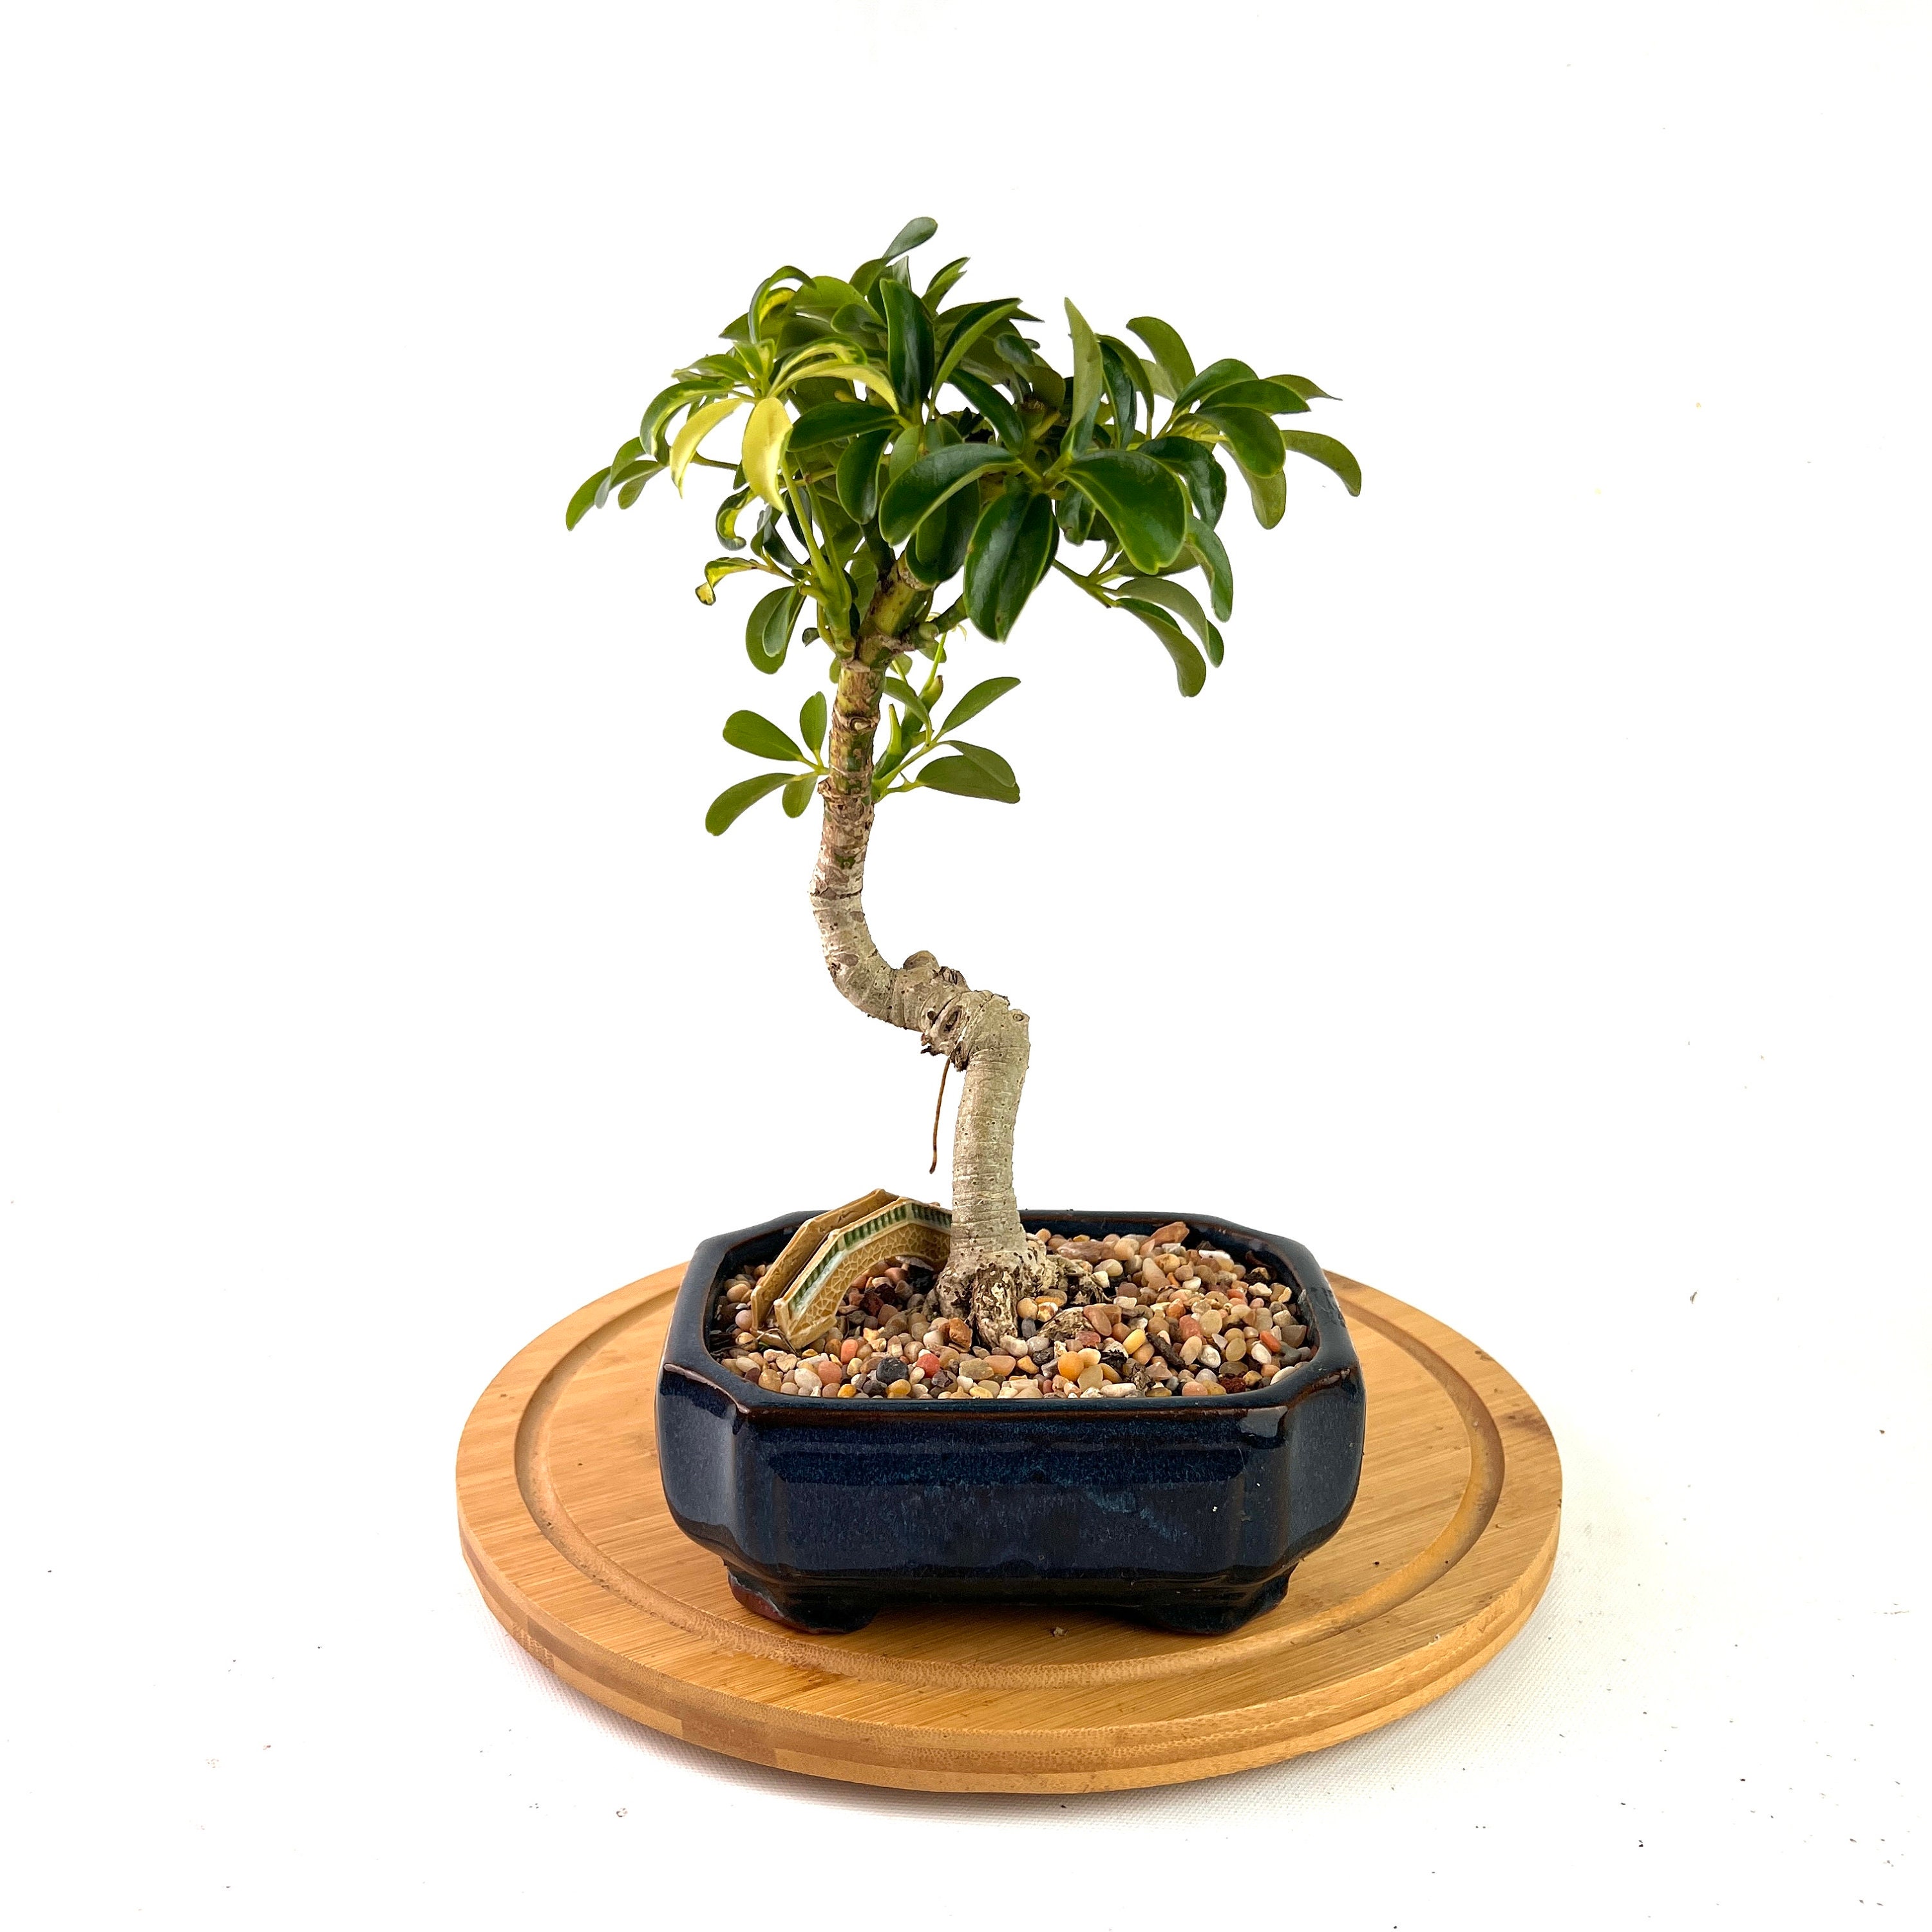 If you cannot find a proper Bonsai pot in your country or cannot